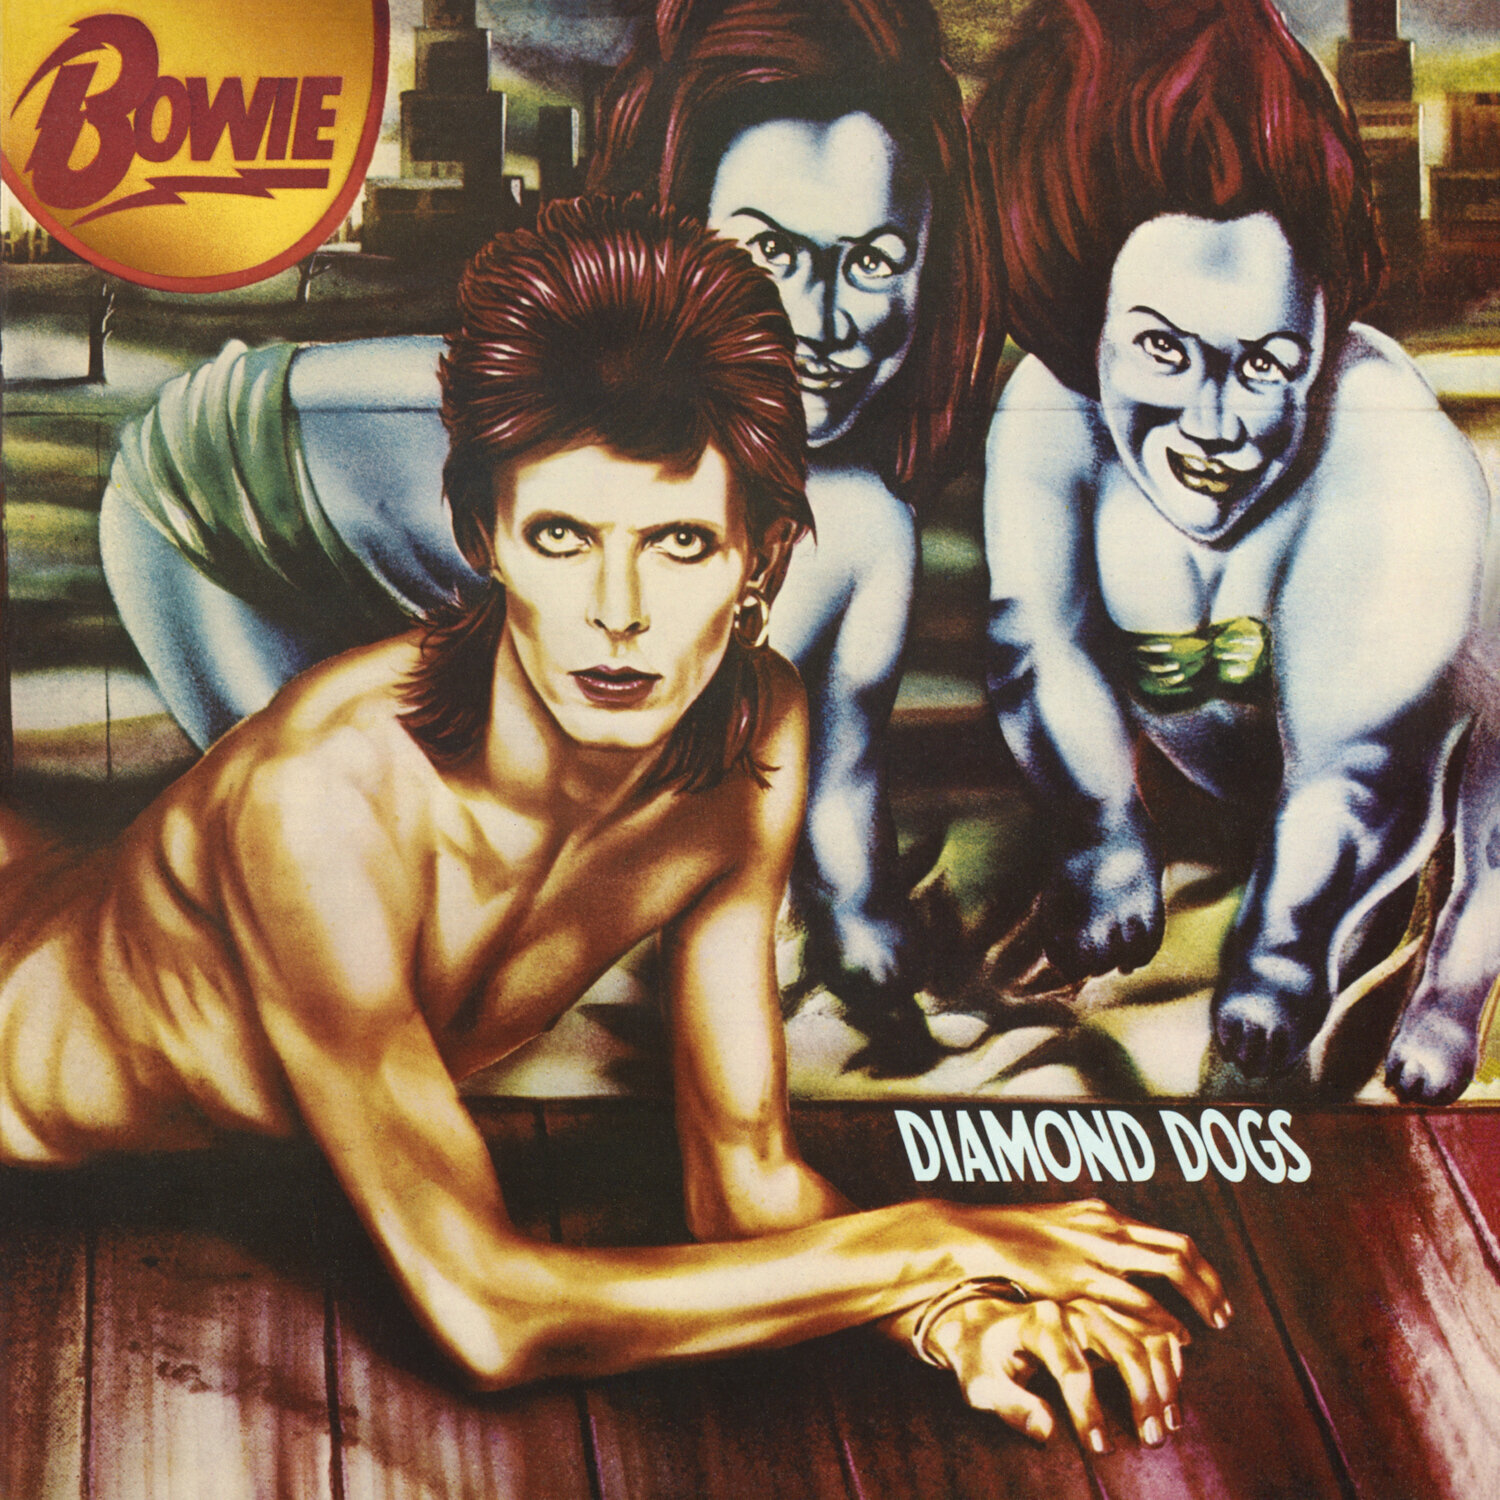 Vinyylilevy David Bowie - Diamond Dogs (50th Anniversary) (Picture Disc) (LP)